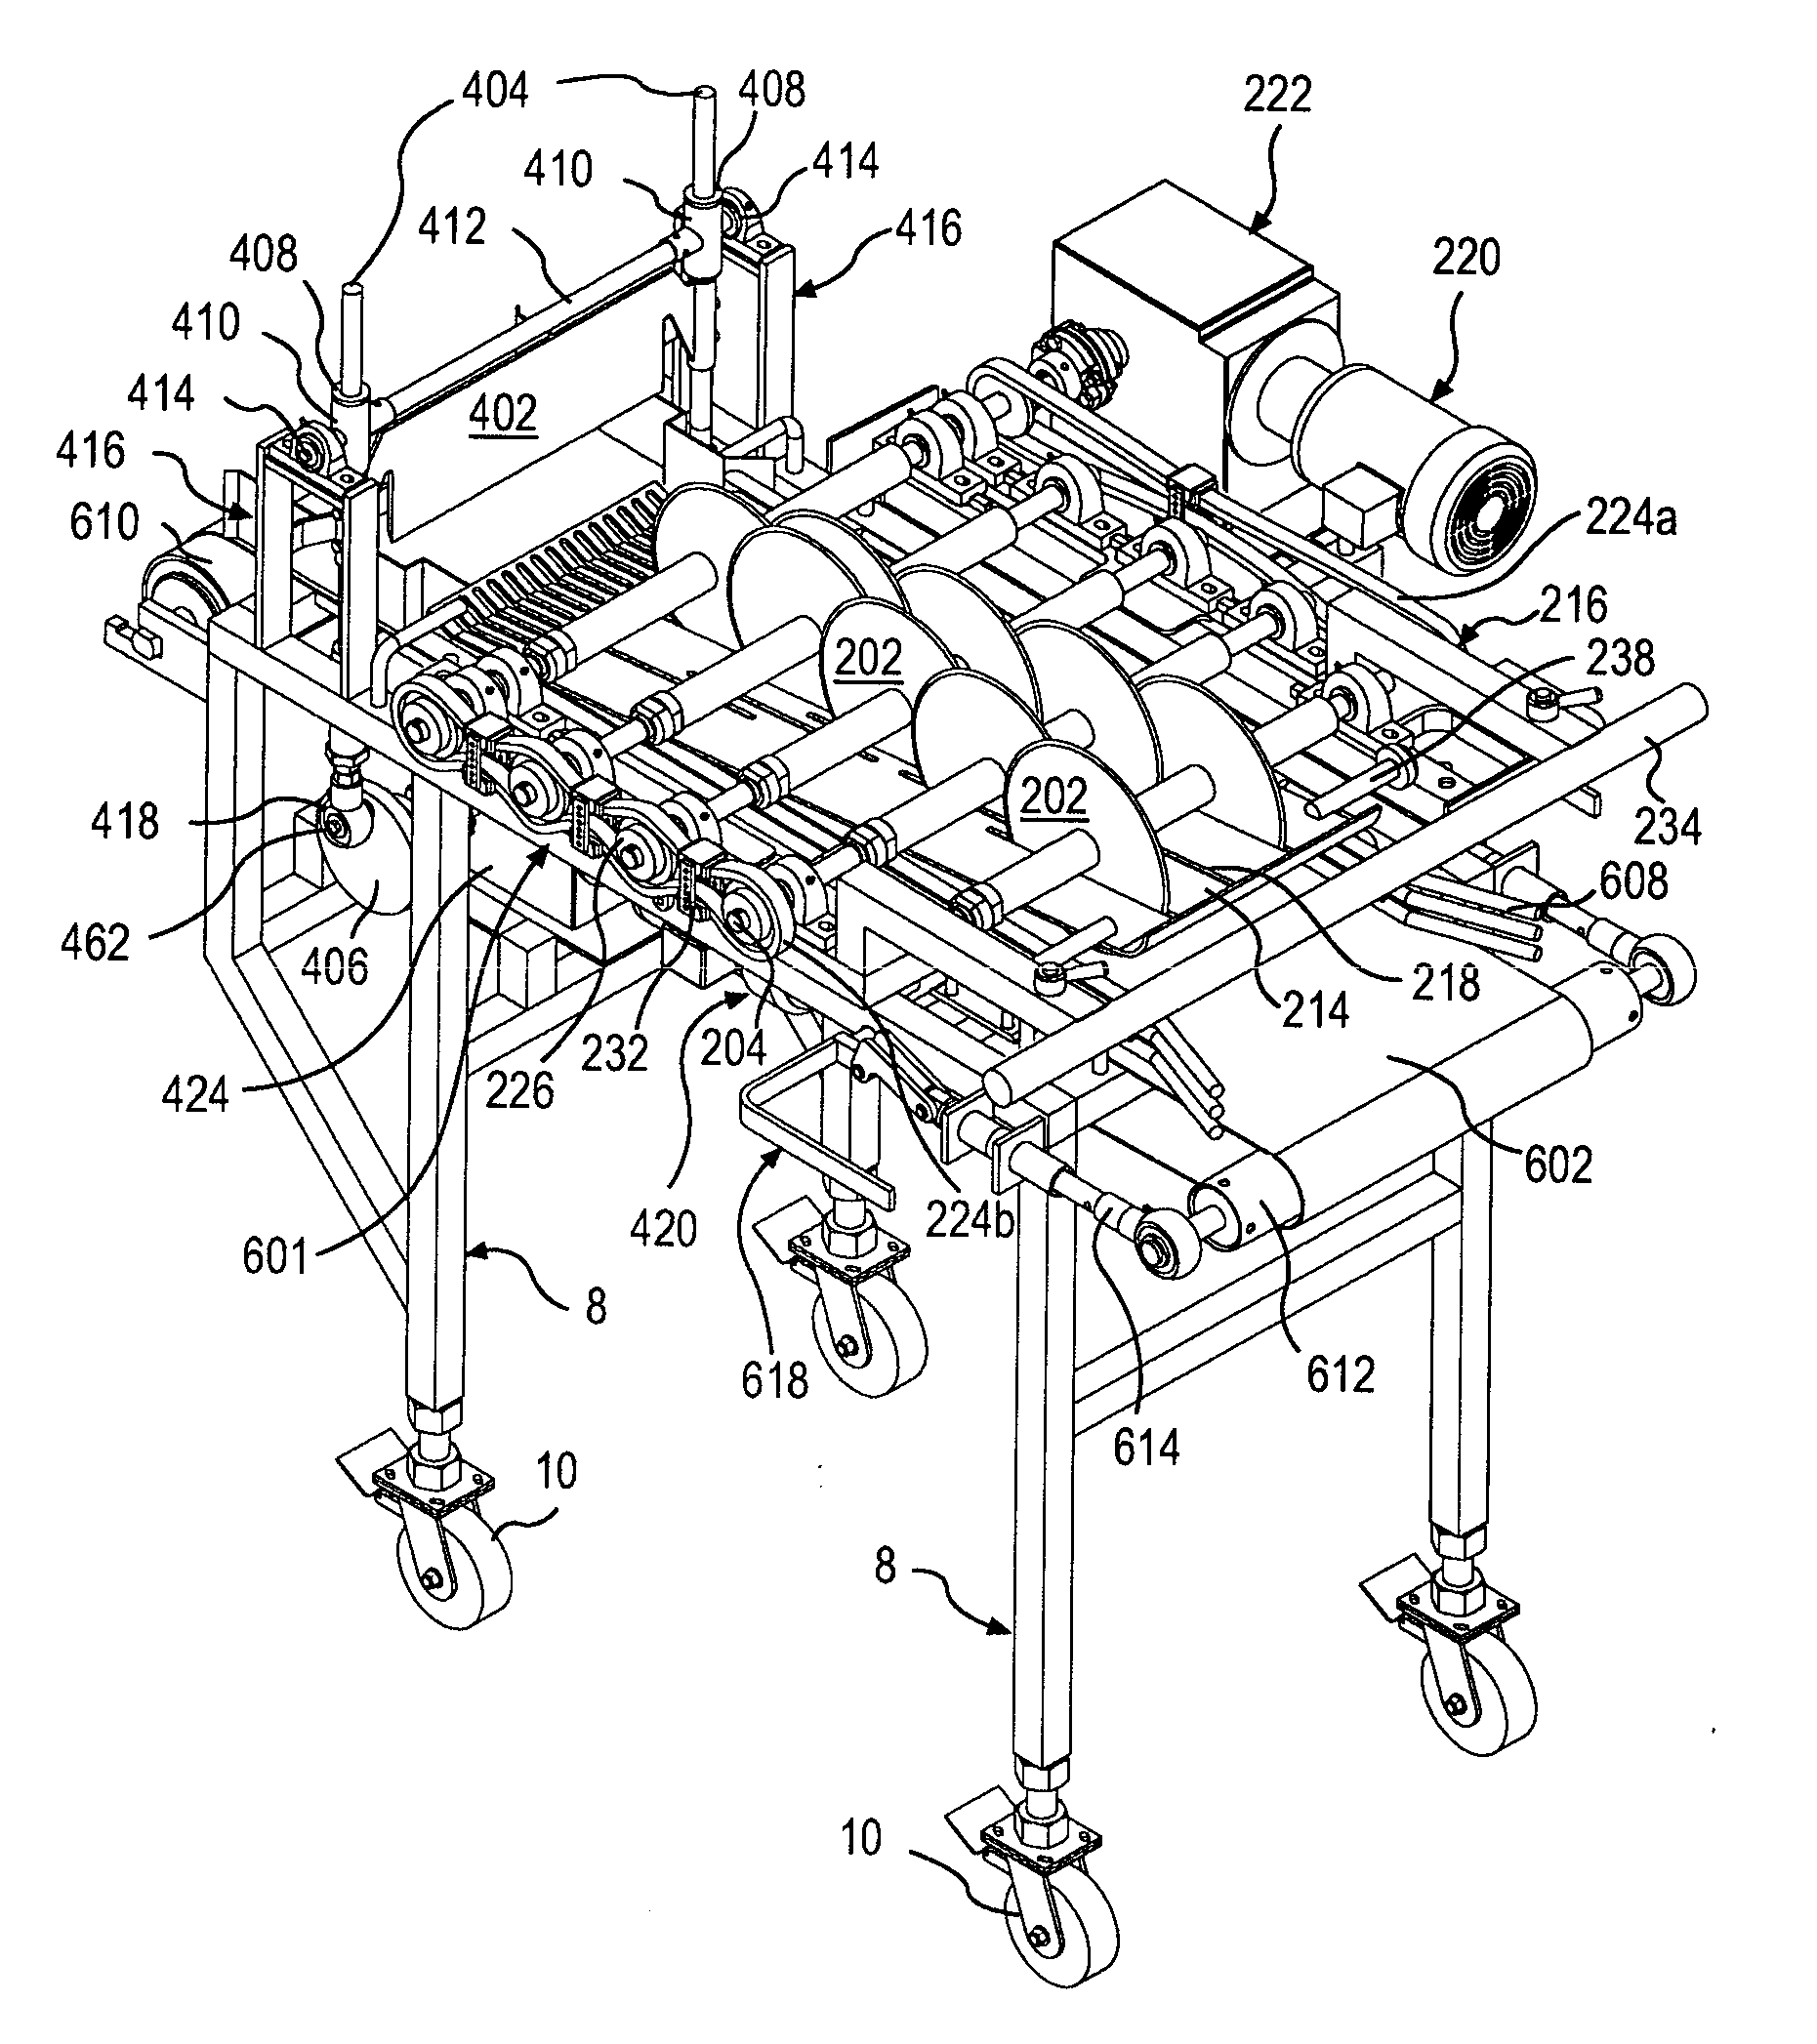 Apparatus and process for dicing a deformable product